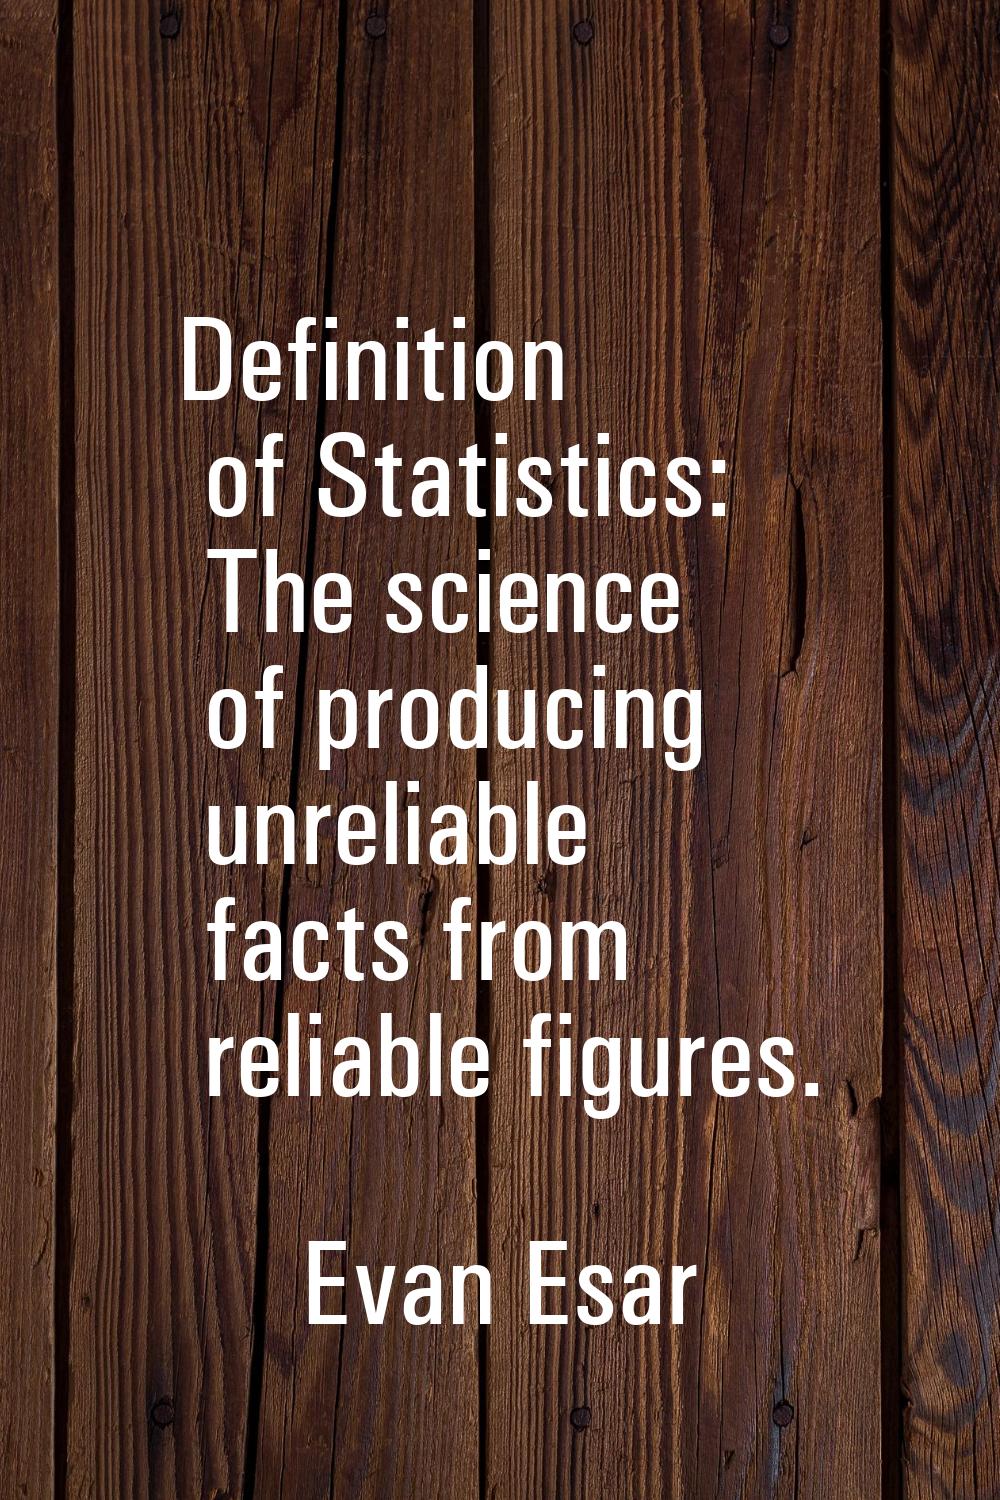 Definition of Statistics: The science of producing unreliable facts from reliable figures.